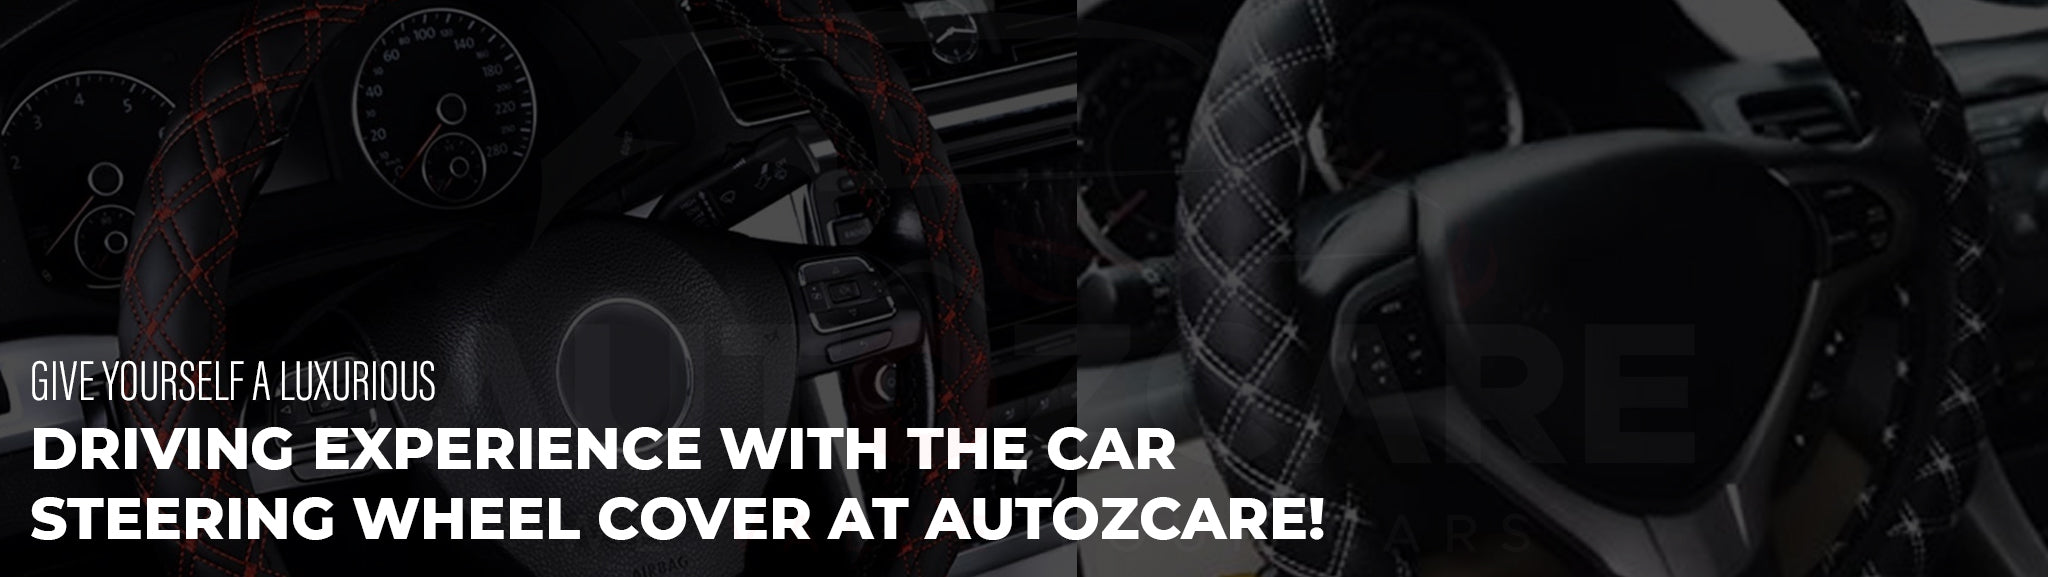 Give yourself a luxurious driving experience with the car steering wheel cover at autozcare!